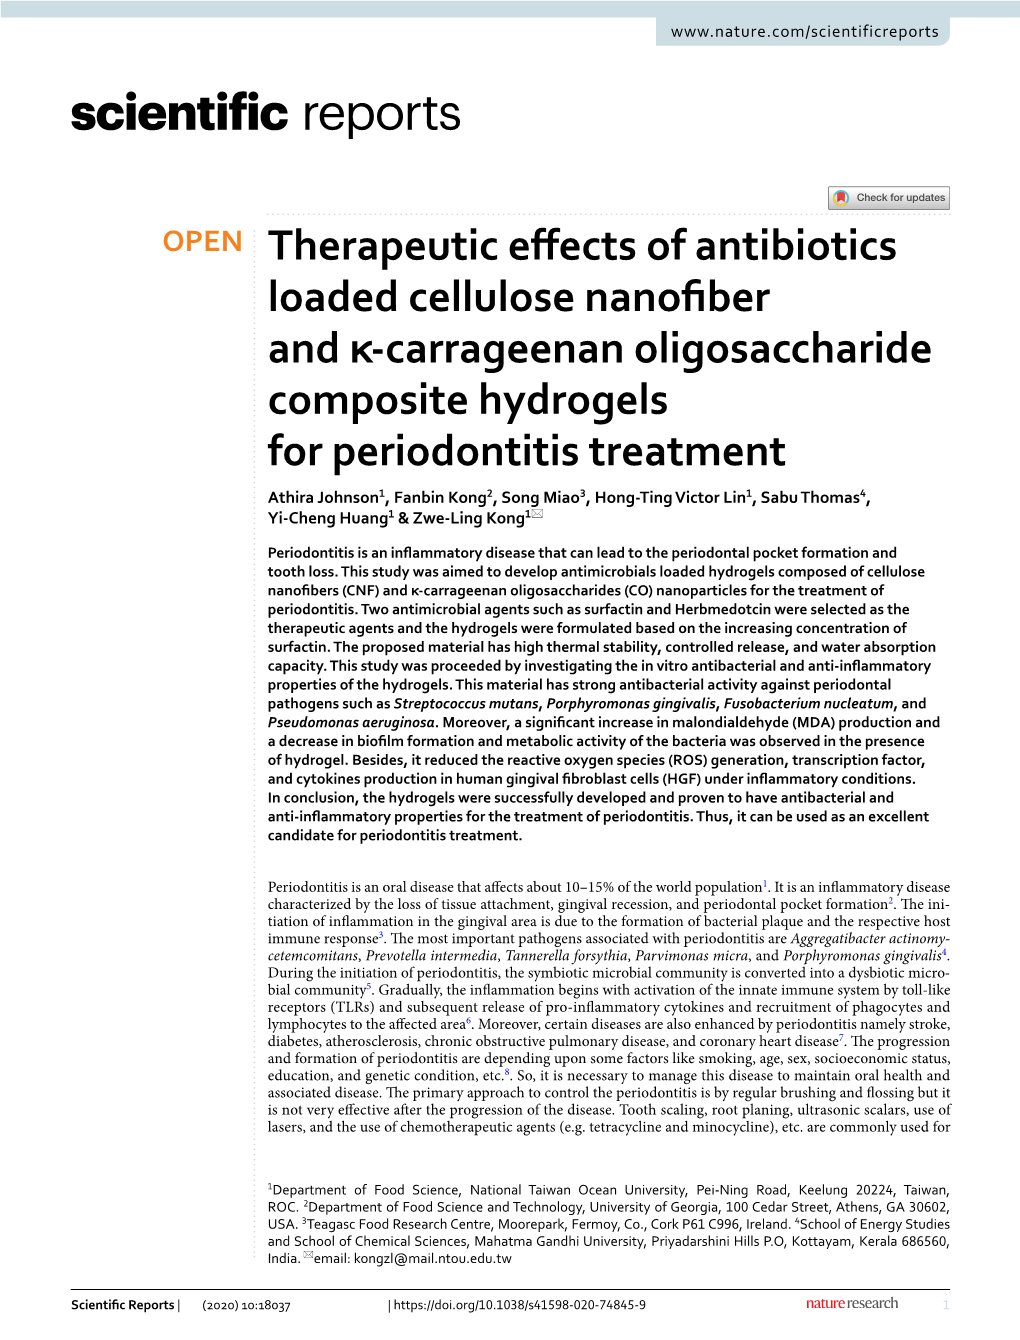 Therapeutic Effects of Antibiotics Loaded Cellulose Nanofiber and Κ-Carrageenan Oligosaccharide Composite Hydrogels for Periodo